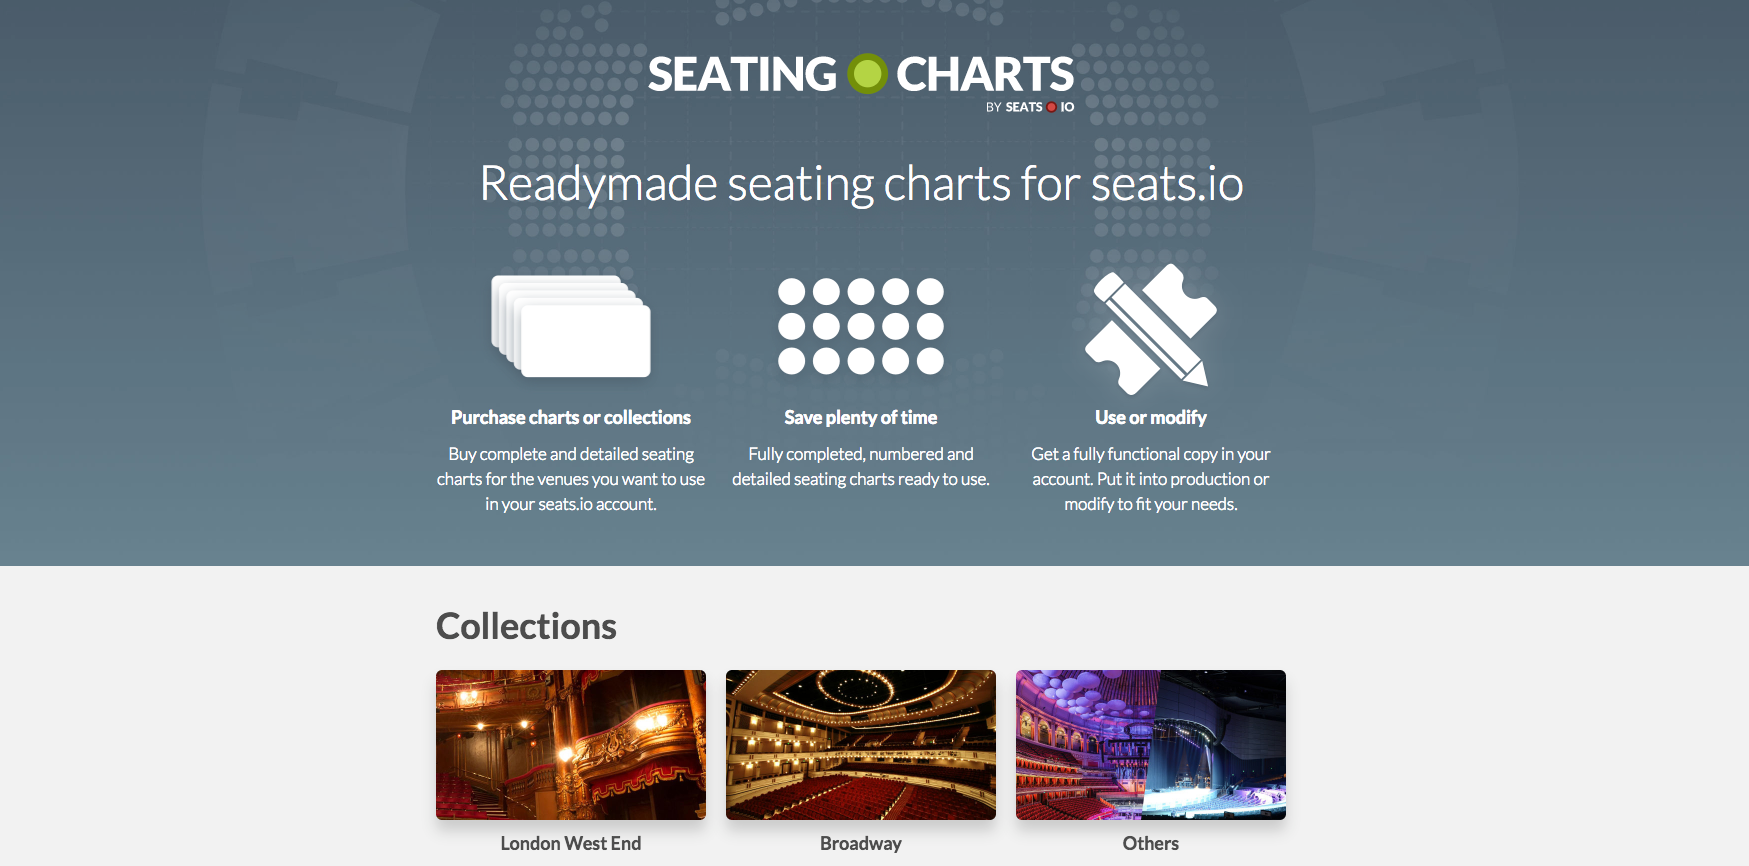 Seating Chart For Beautiful On Broadway